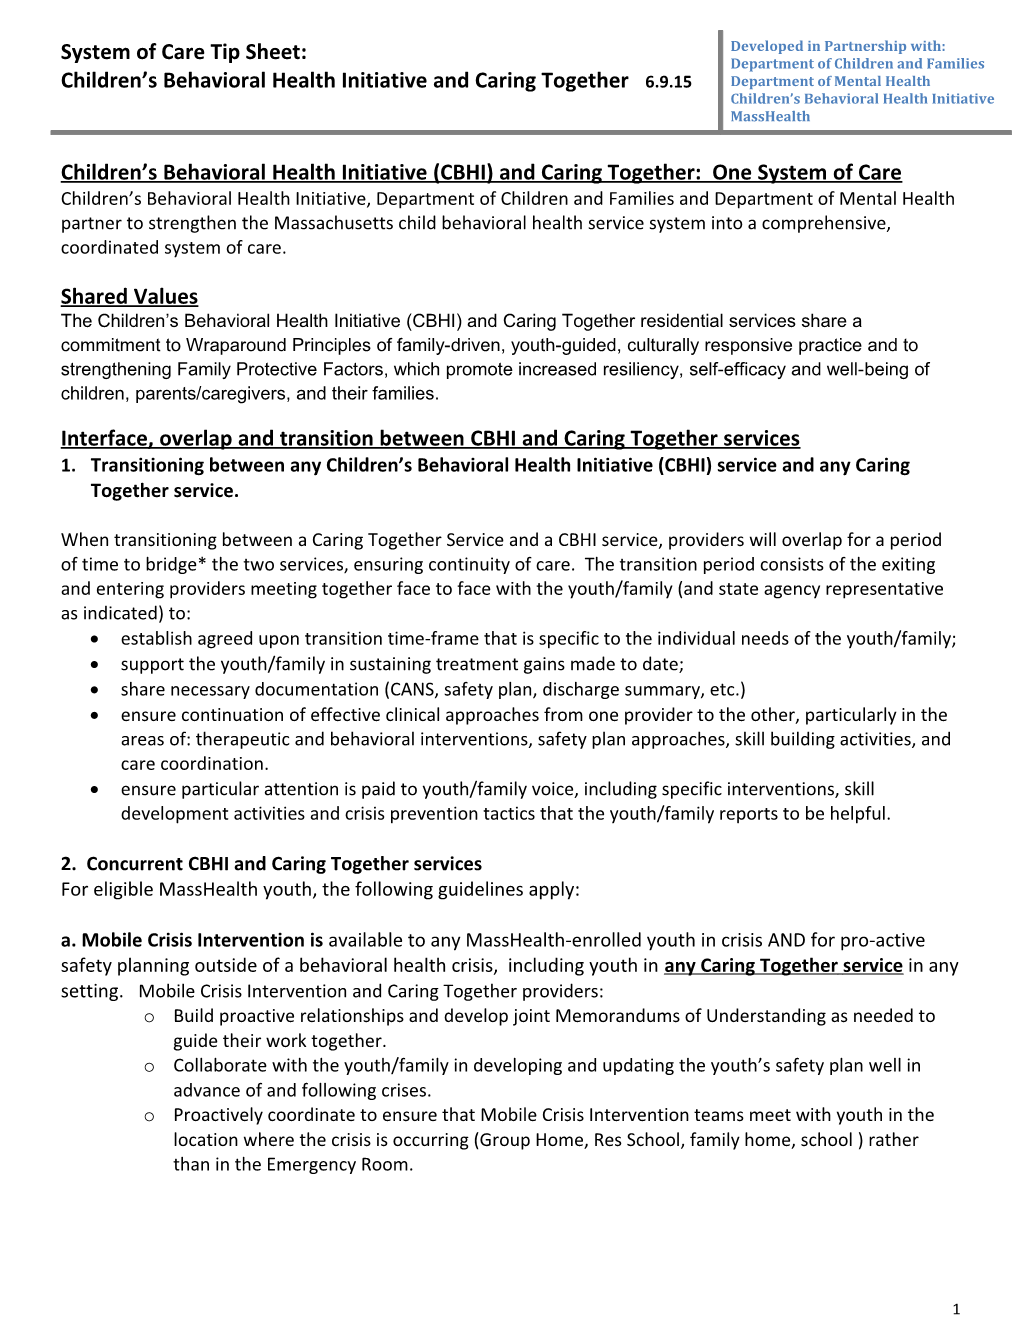 System of Care Tip Sheet: Children S Behavioral Health Initiative and Caring Together